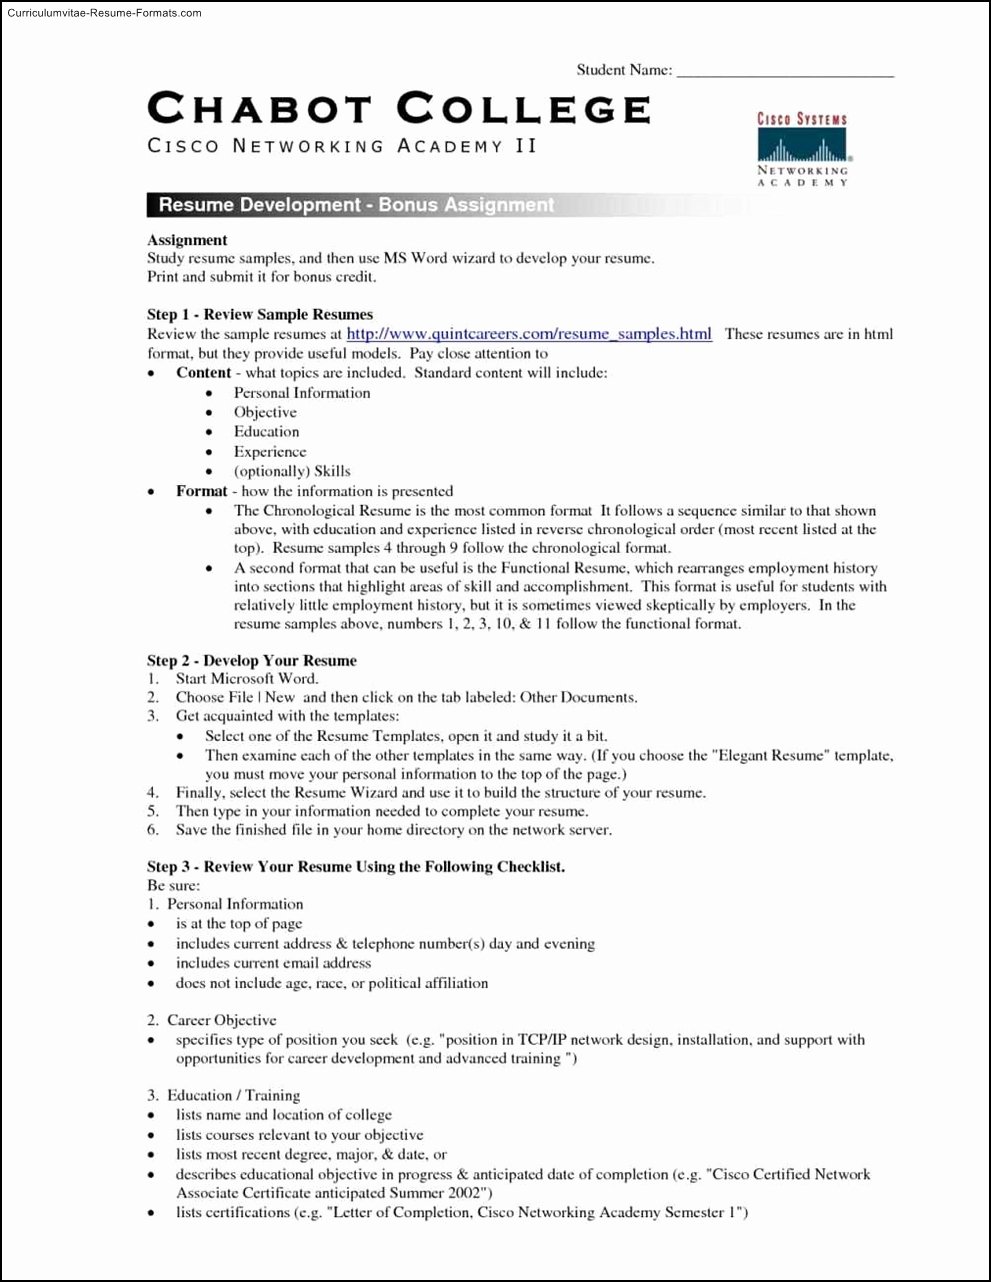 Free Resume Templates for College Students Free Samples